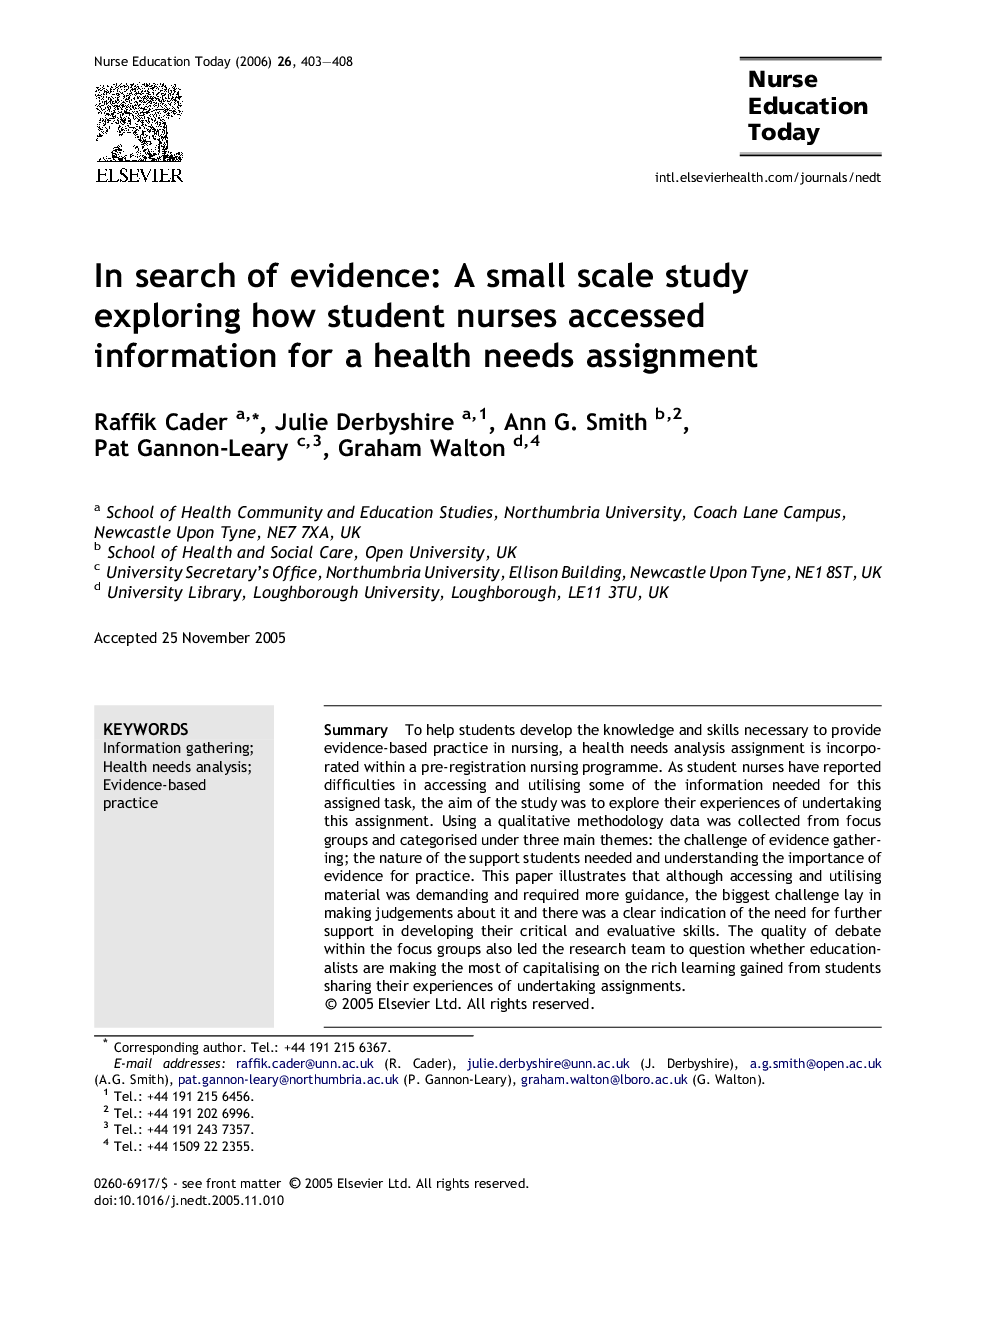 In search of evidence: A small scale study exploring how student nurses accessed information for a health needs assignment